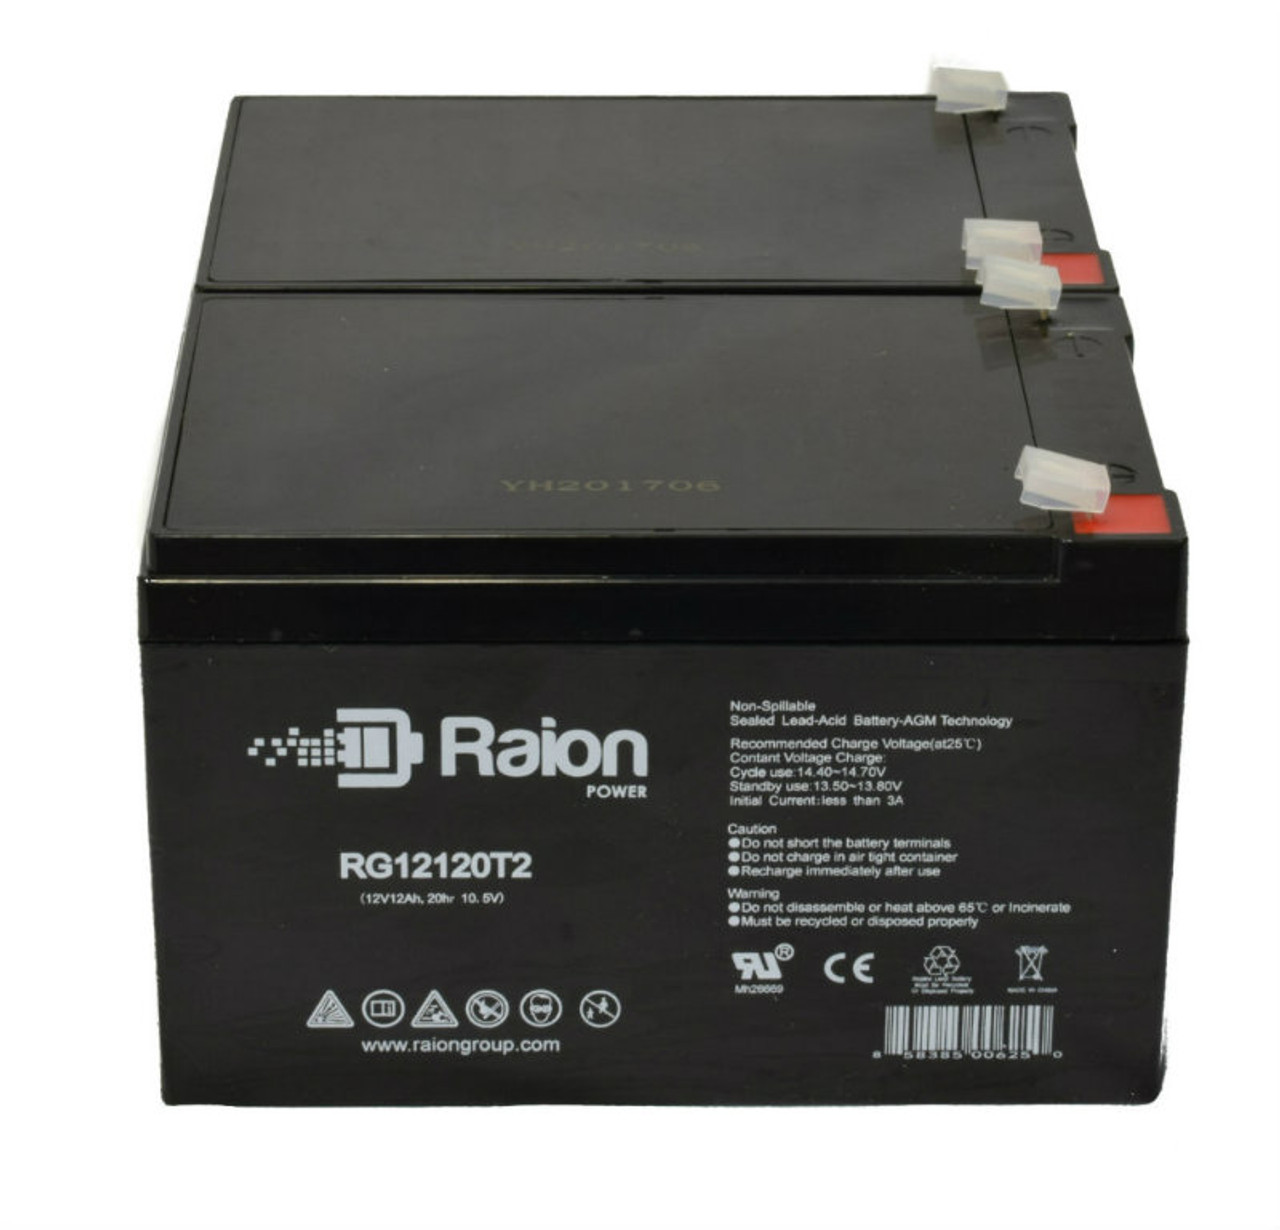 Raion Power RG12120T2 Replacement Emergency Light Battery for Simplex 20013072 - 2 Pack